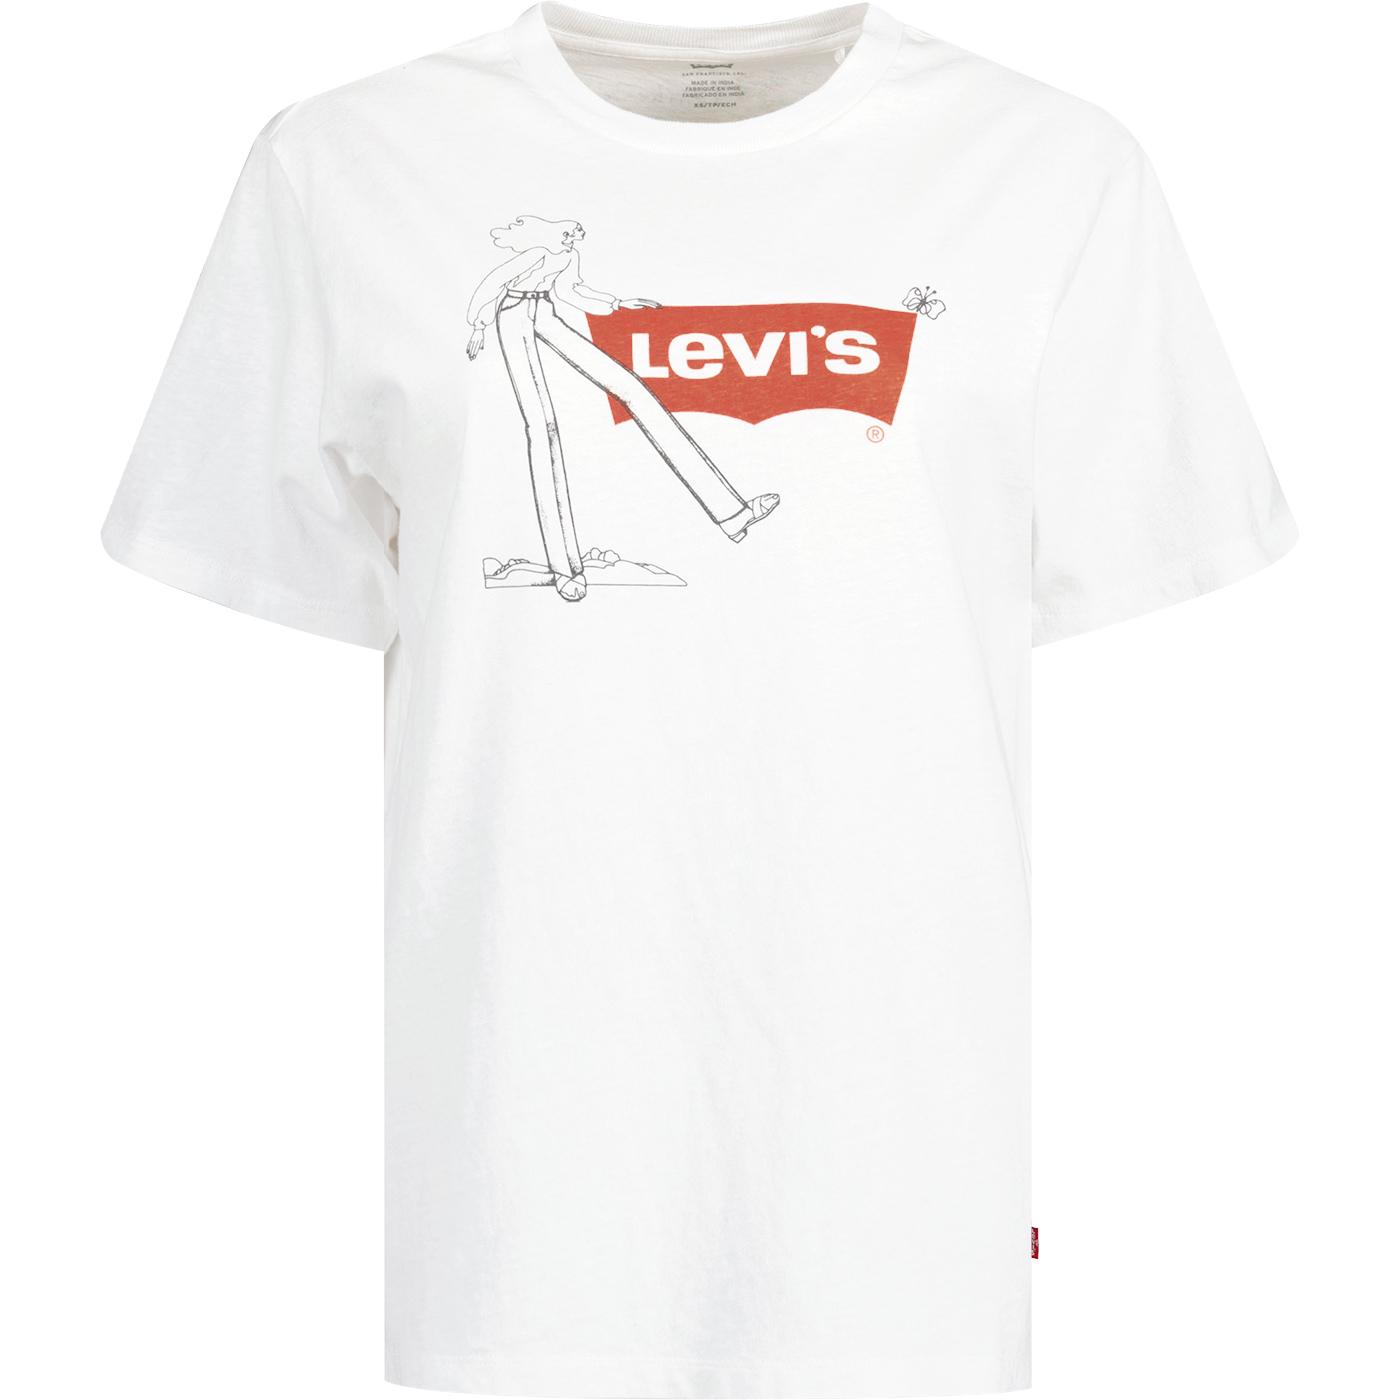 LEVI'S® For Gals Retro 70s Batwing Graphic Jet Tee